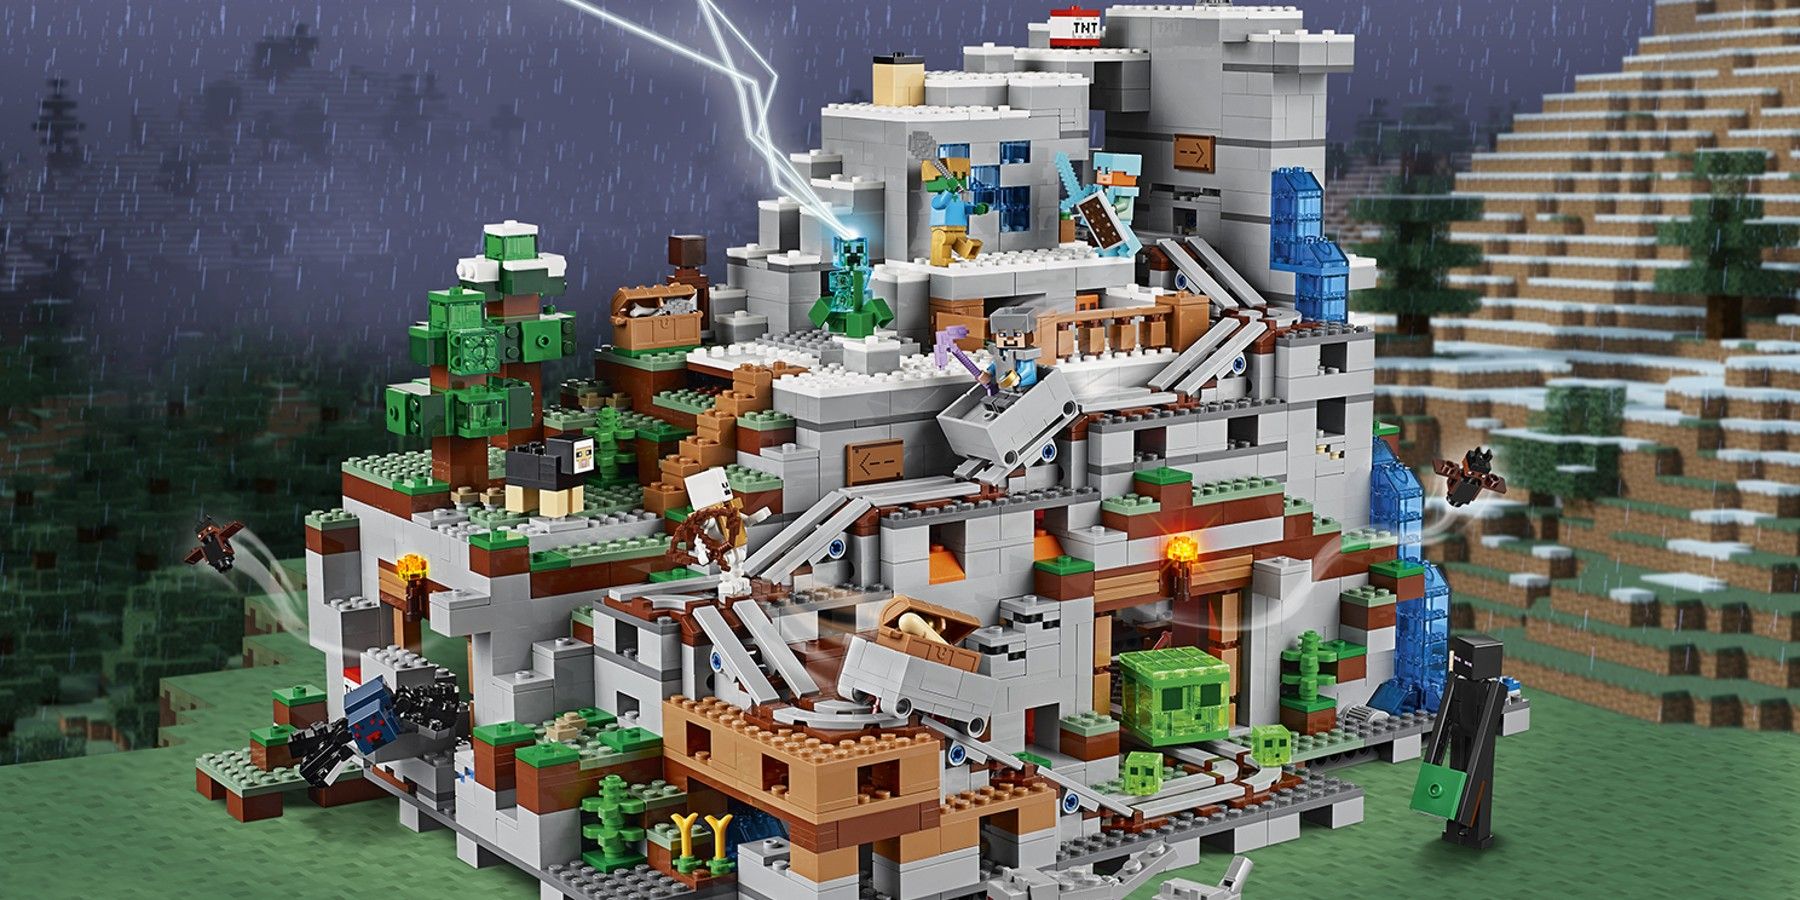 Lego Minecraft Mountain Cave set in rendered rainy scene with lightning